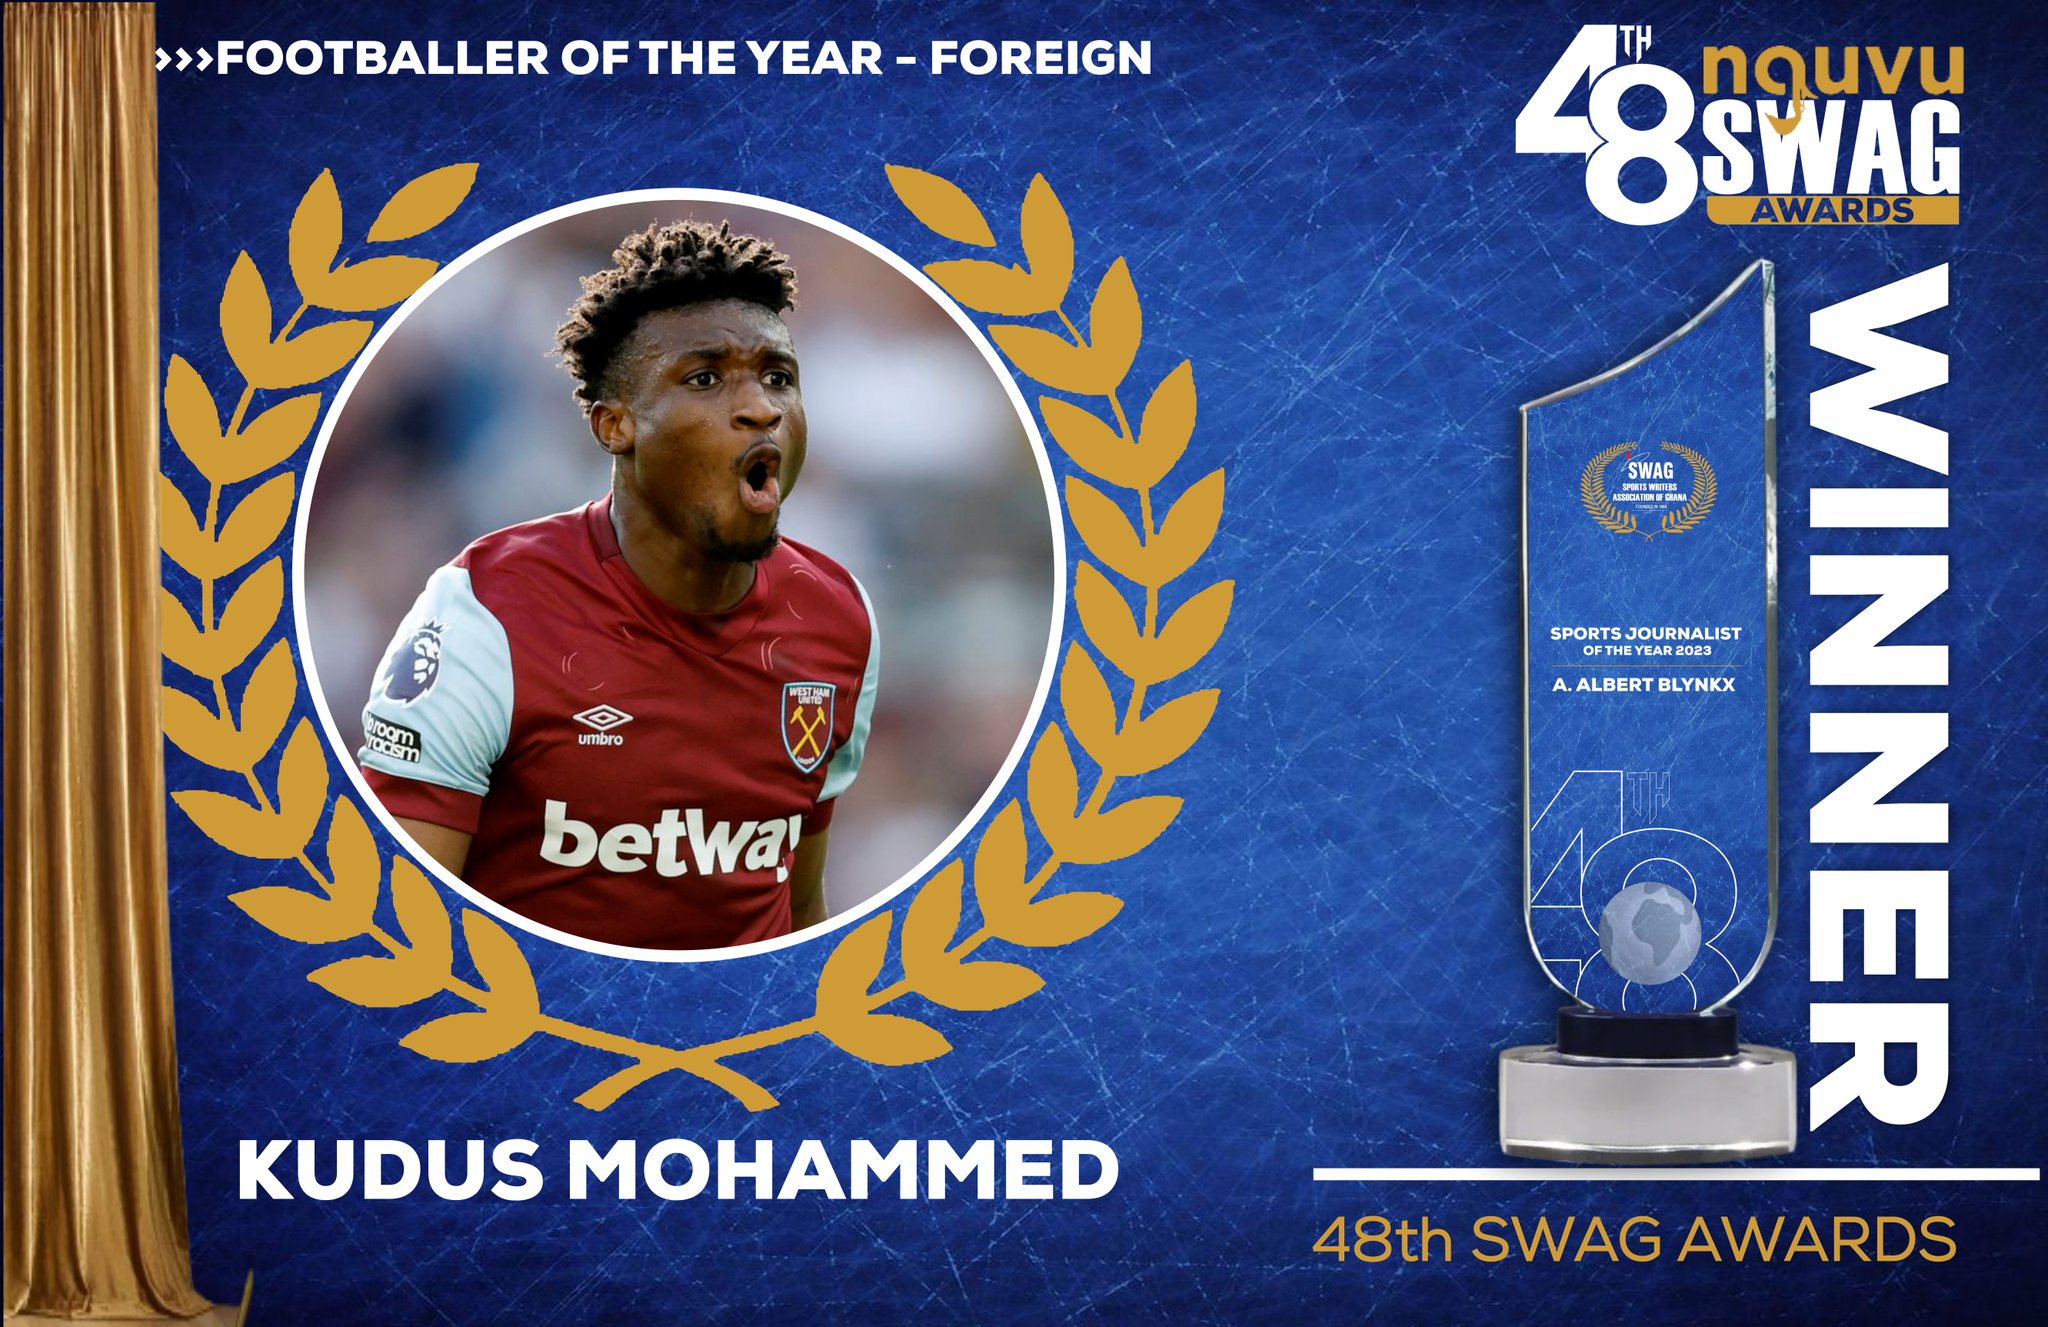 48th SWAG Awards: Mohammed Kudus wins Player of the Year